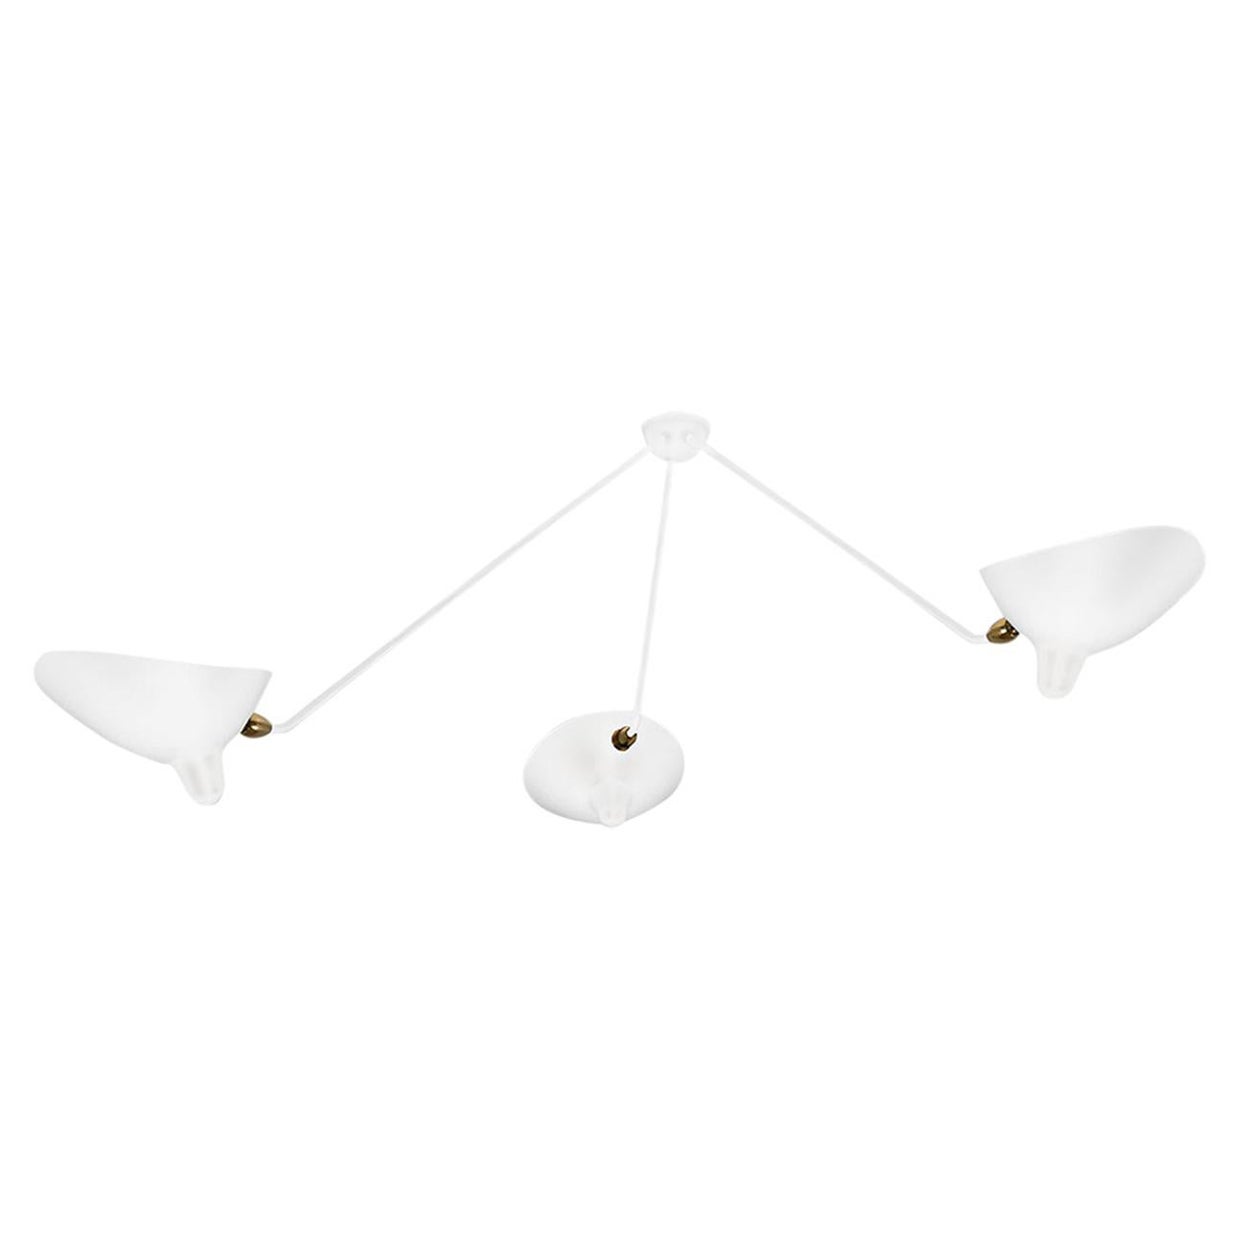 Serge Mouille Modern White Three Fixed Arms Spider Ceiling Sconce Lamp